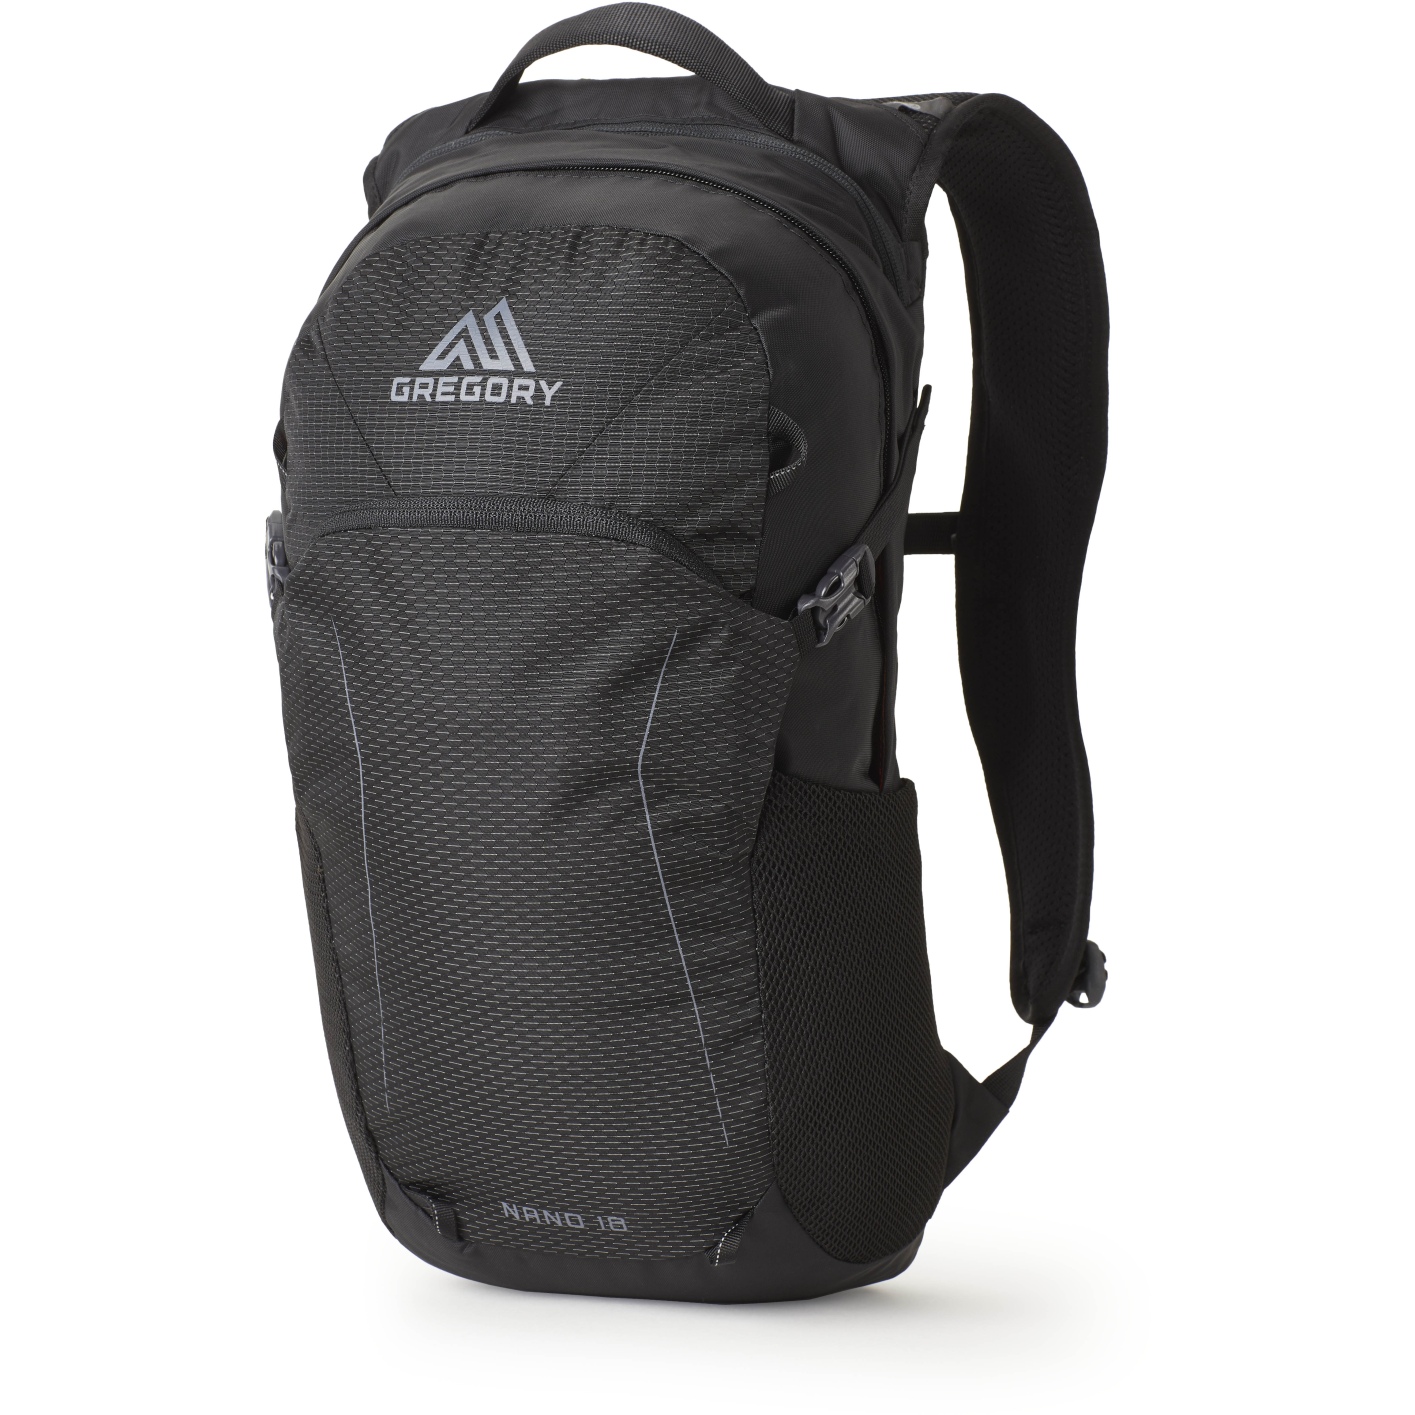 Picture of Gregory Nano 18 Backpack - Obsidian Black